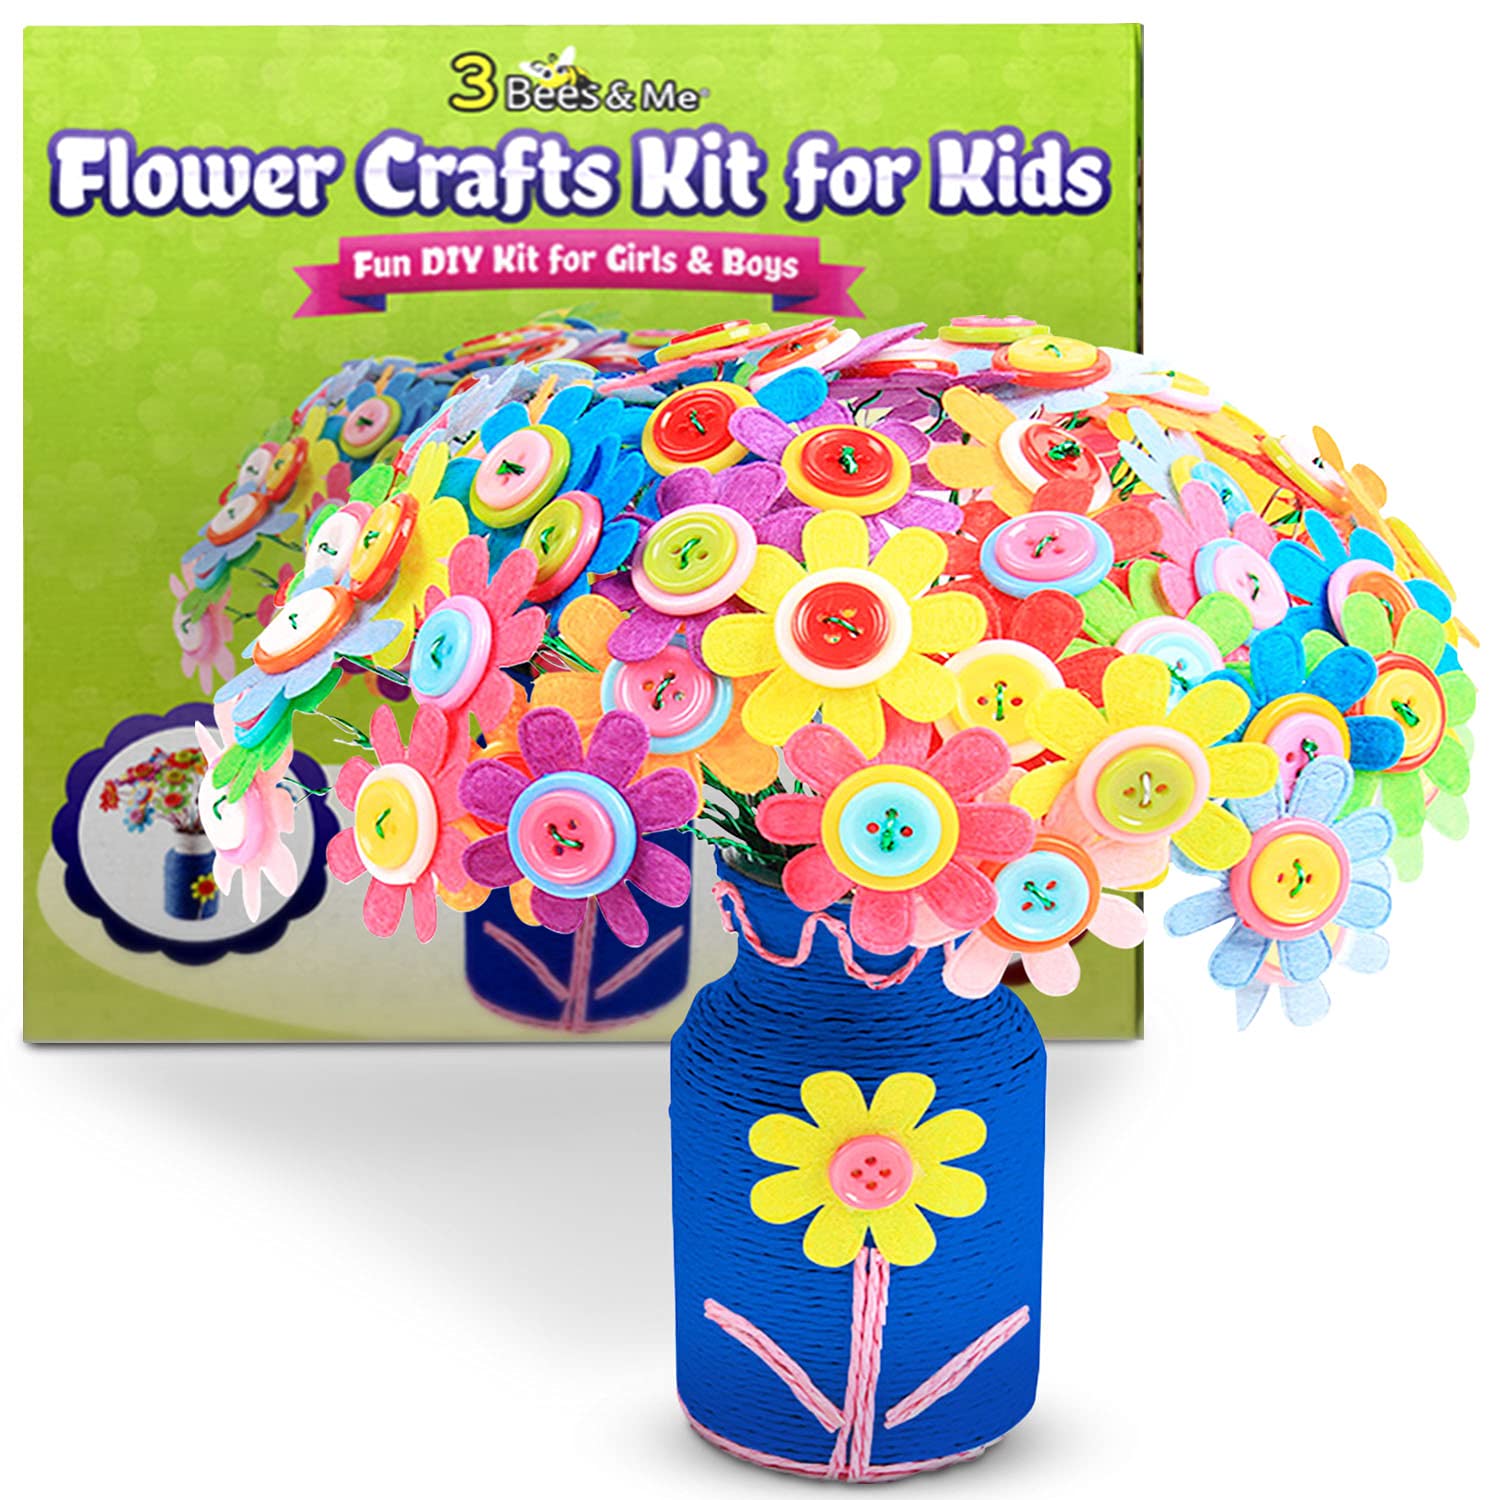 Book Cover 3 Bees & Me Flower Crafts Activity Kit for Kids | Fun DIY Arts Project for Girls and Boys | Perfect Birthday, Thanksgiving and Christmas Gift Idea for Children and Tweens Ages 4-12 Years Old and Up